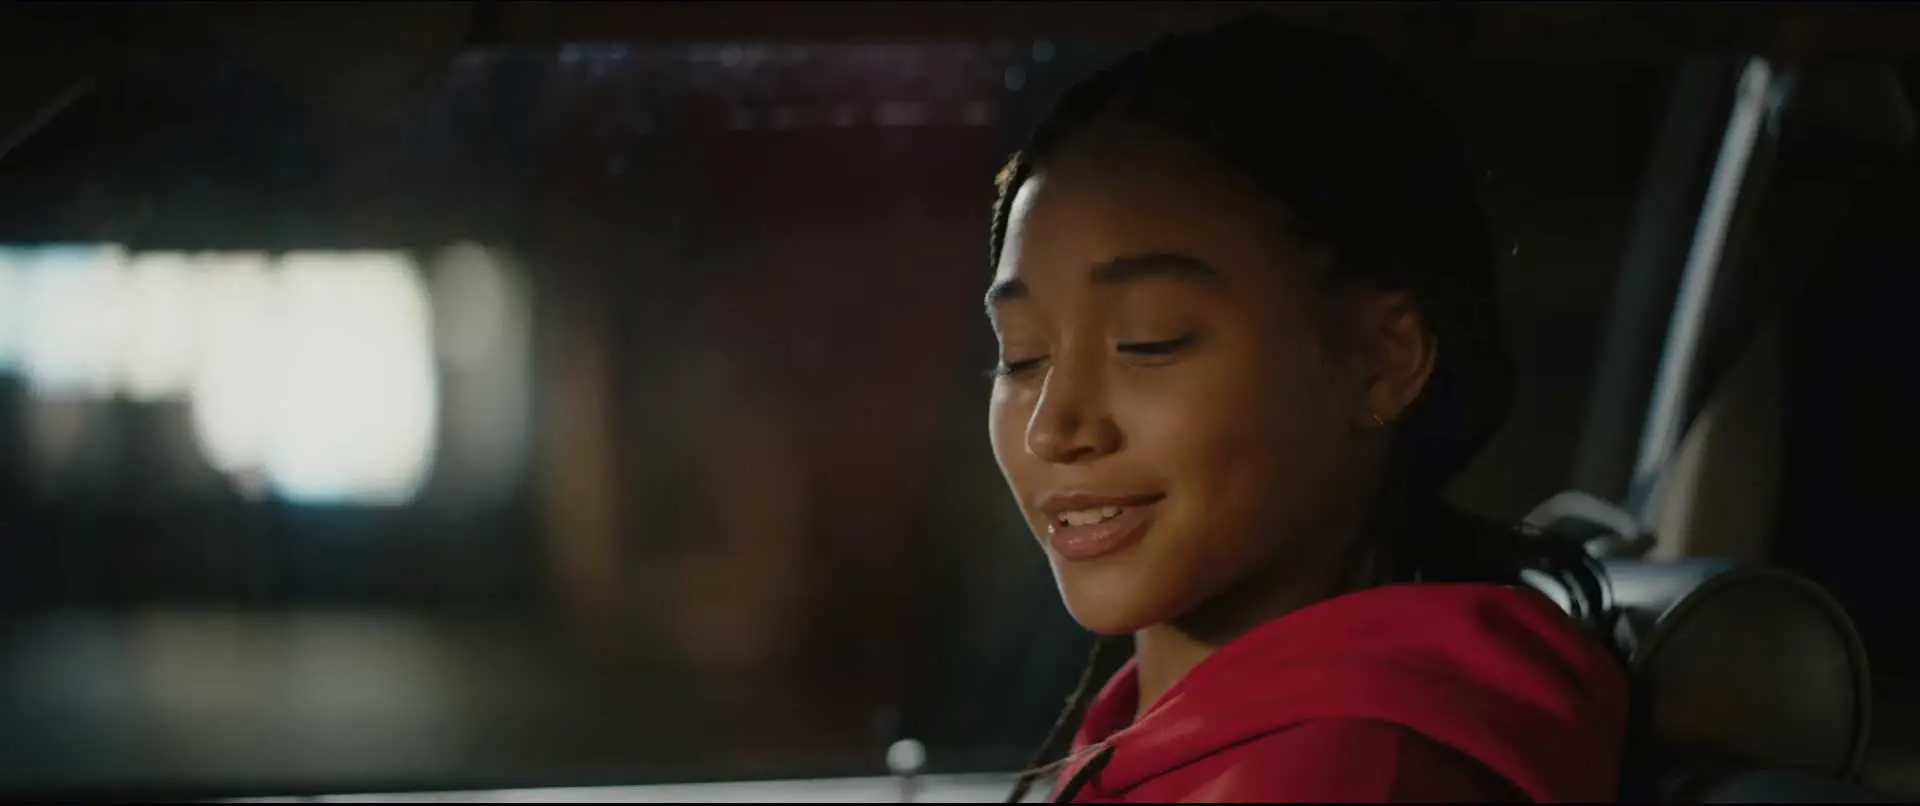 The Hate U Give Download | MadDownload.com